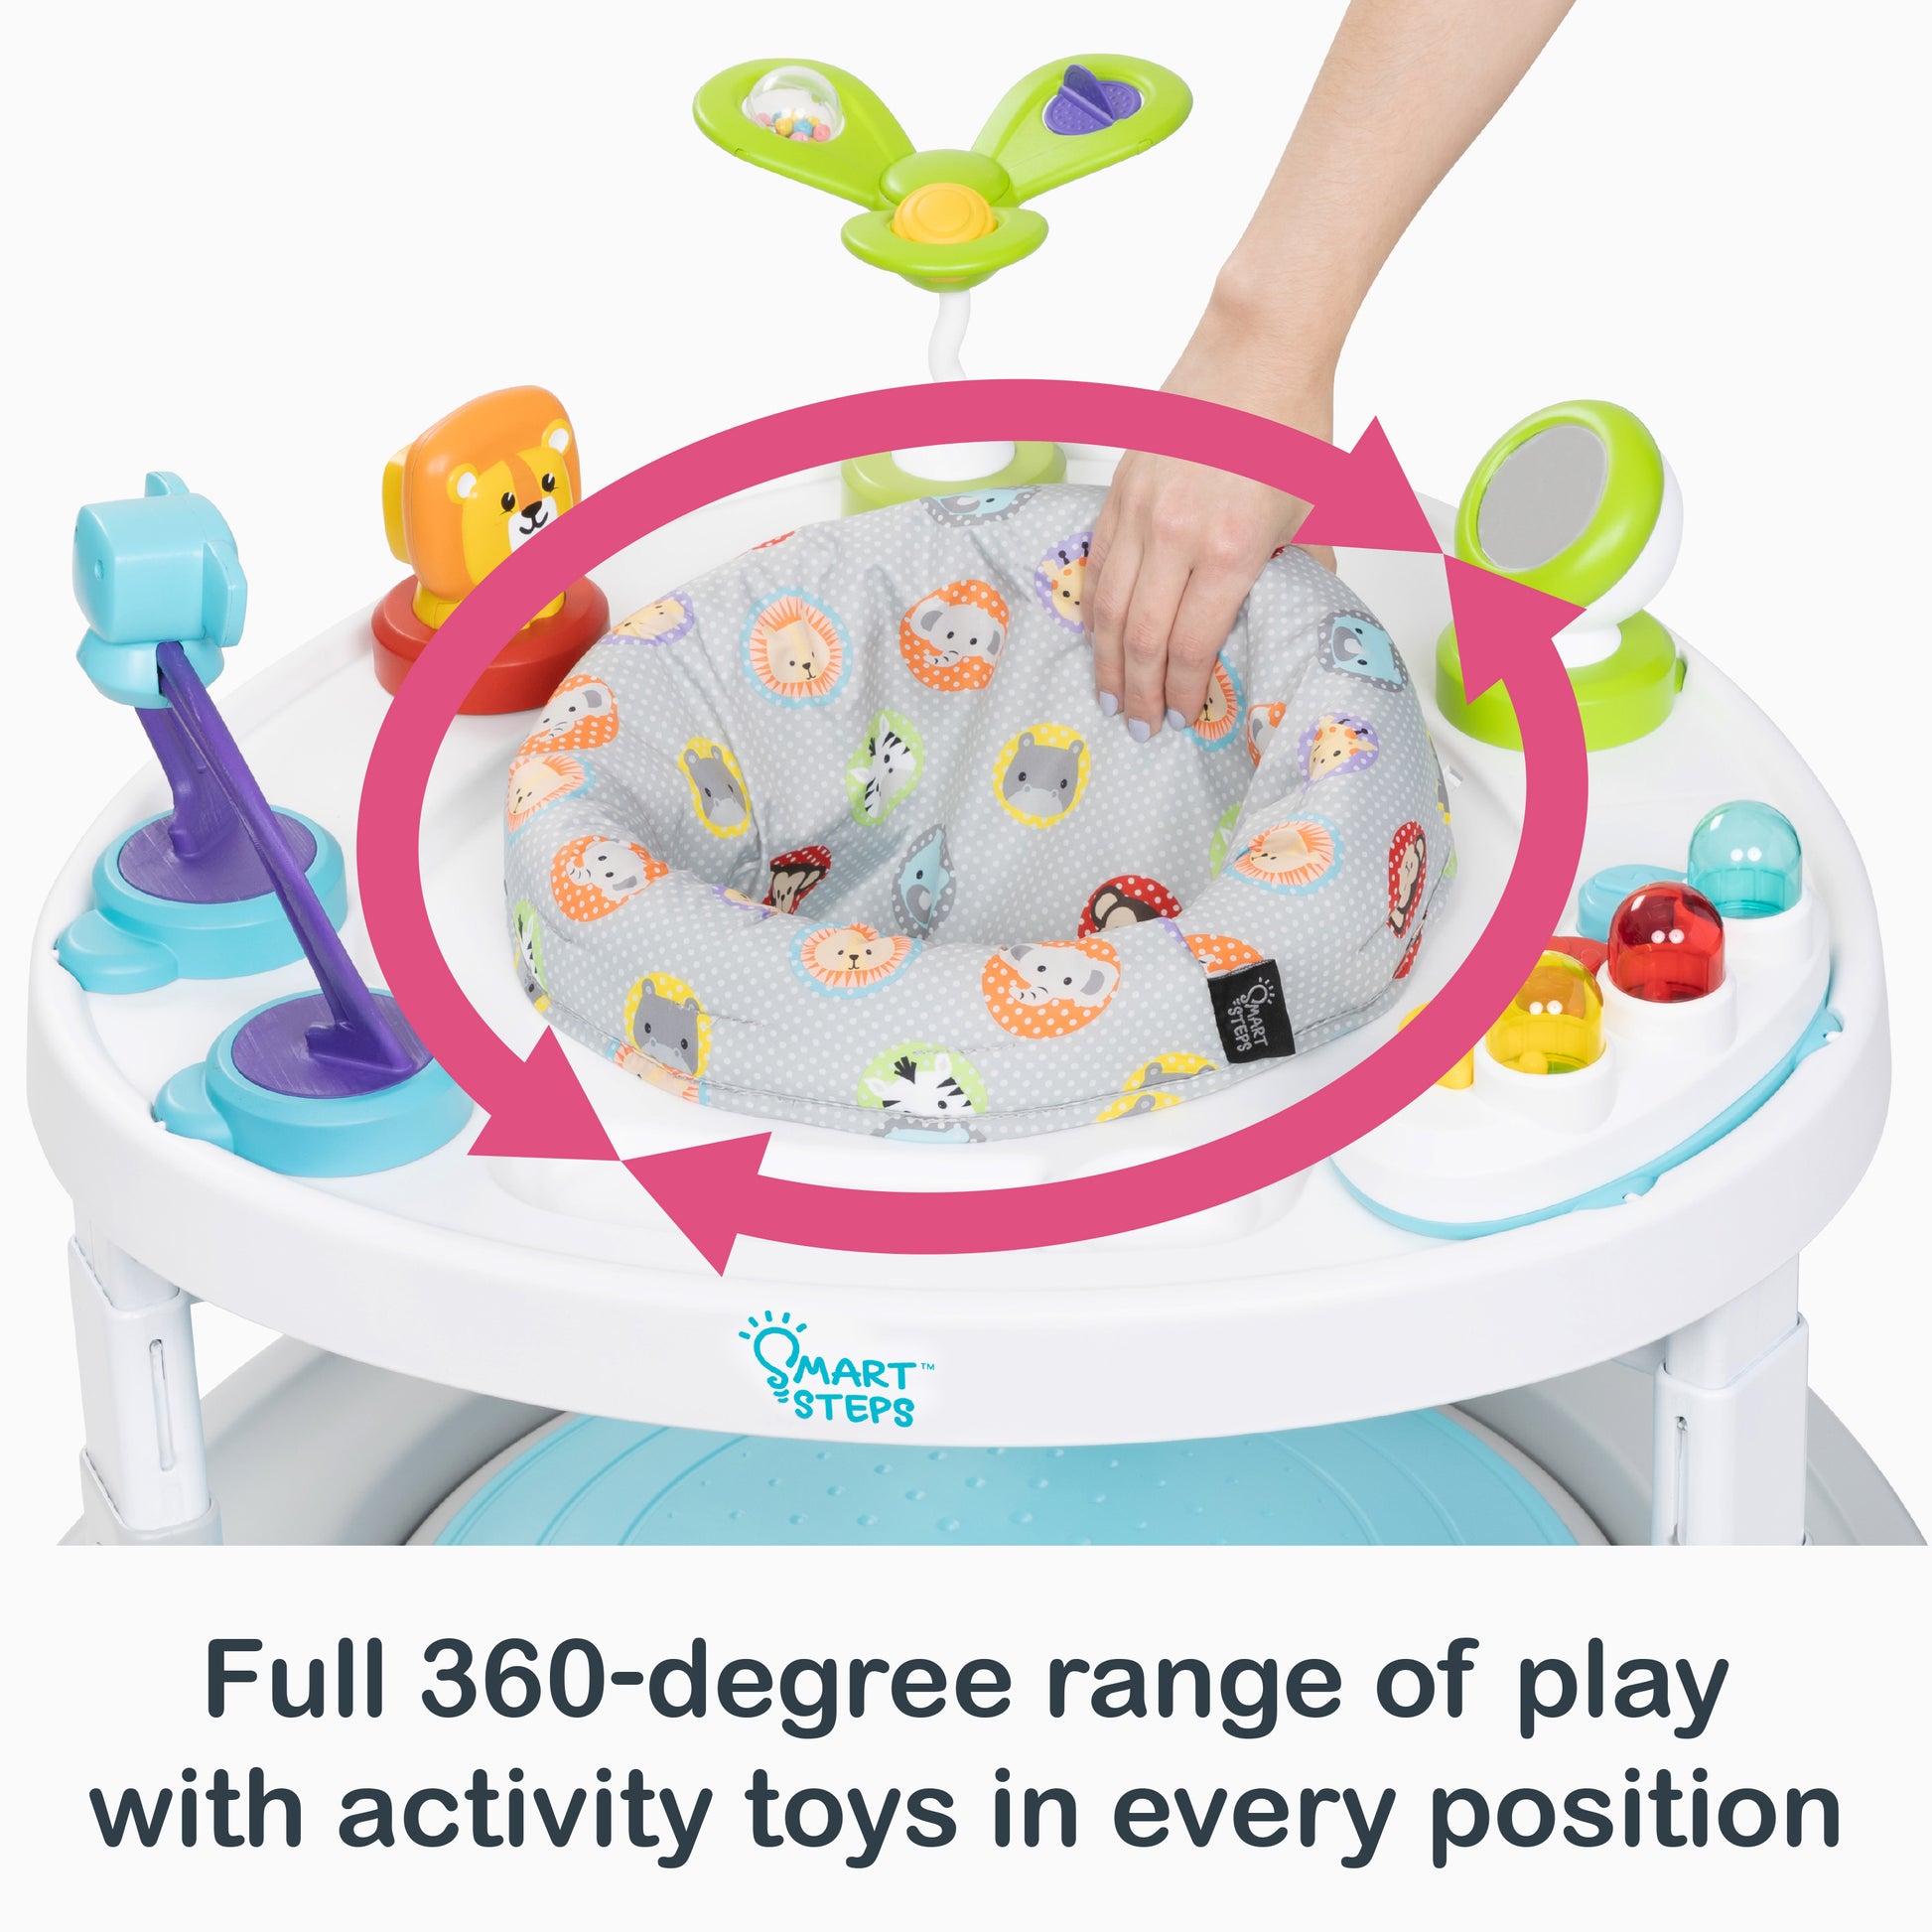 Full 360-degree range of play with activity toys in every position of the Smart Steps Bounce N' Glide 3-in-1 Activity Center Walker